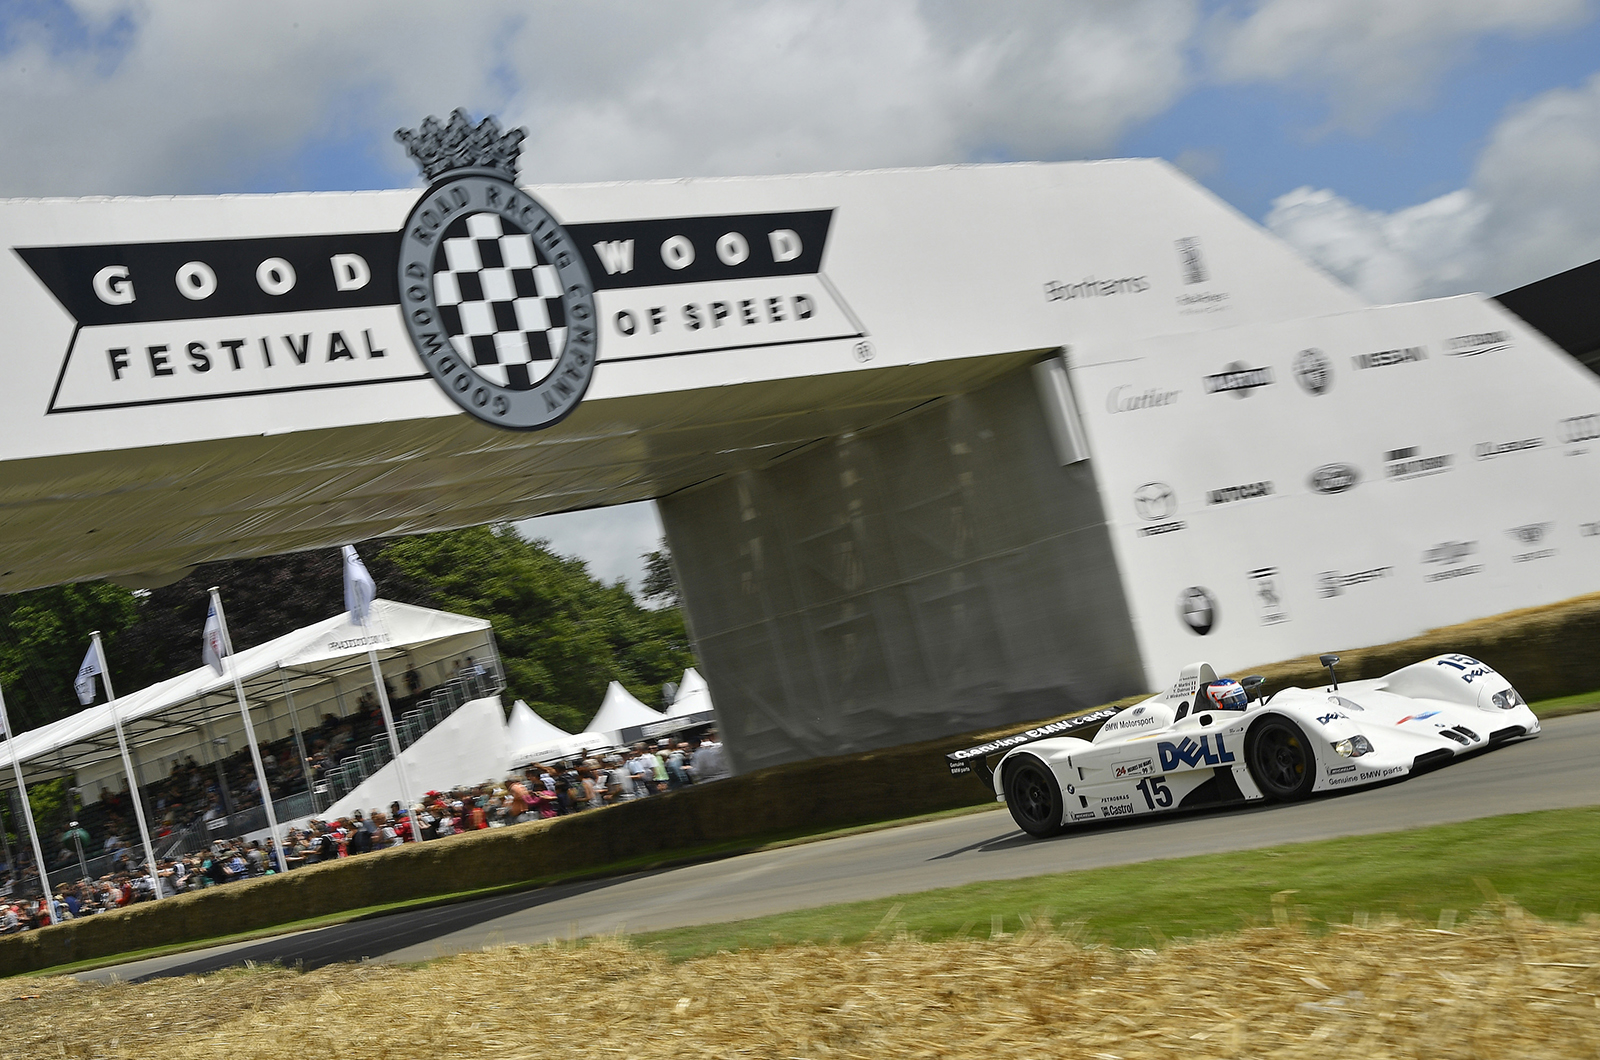 Classic & Sports Car – Top classics at the 2018 Goodwood Festival of Speed